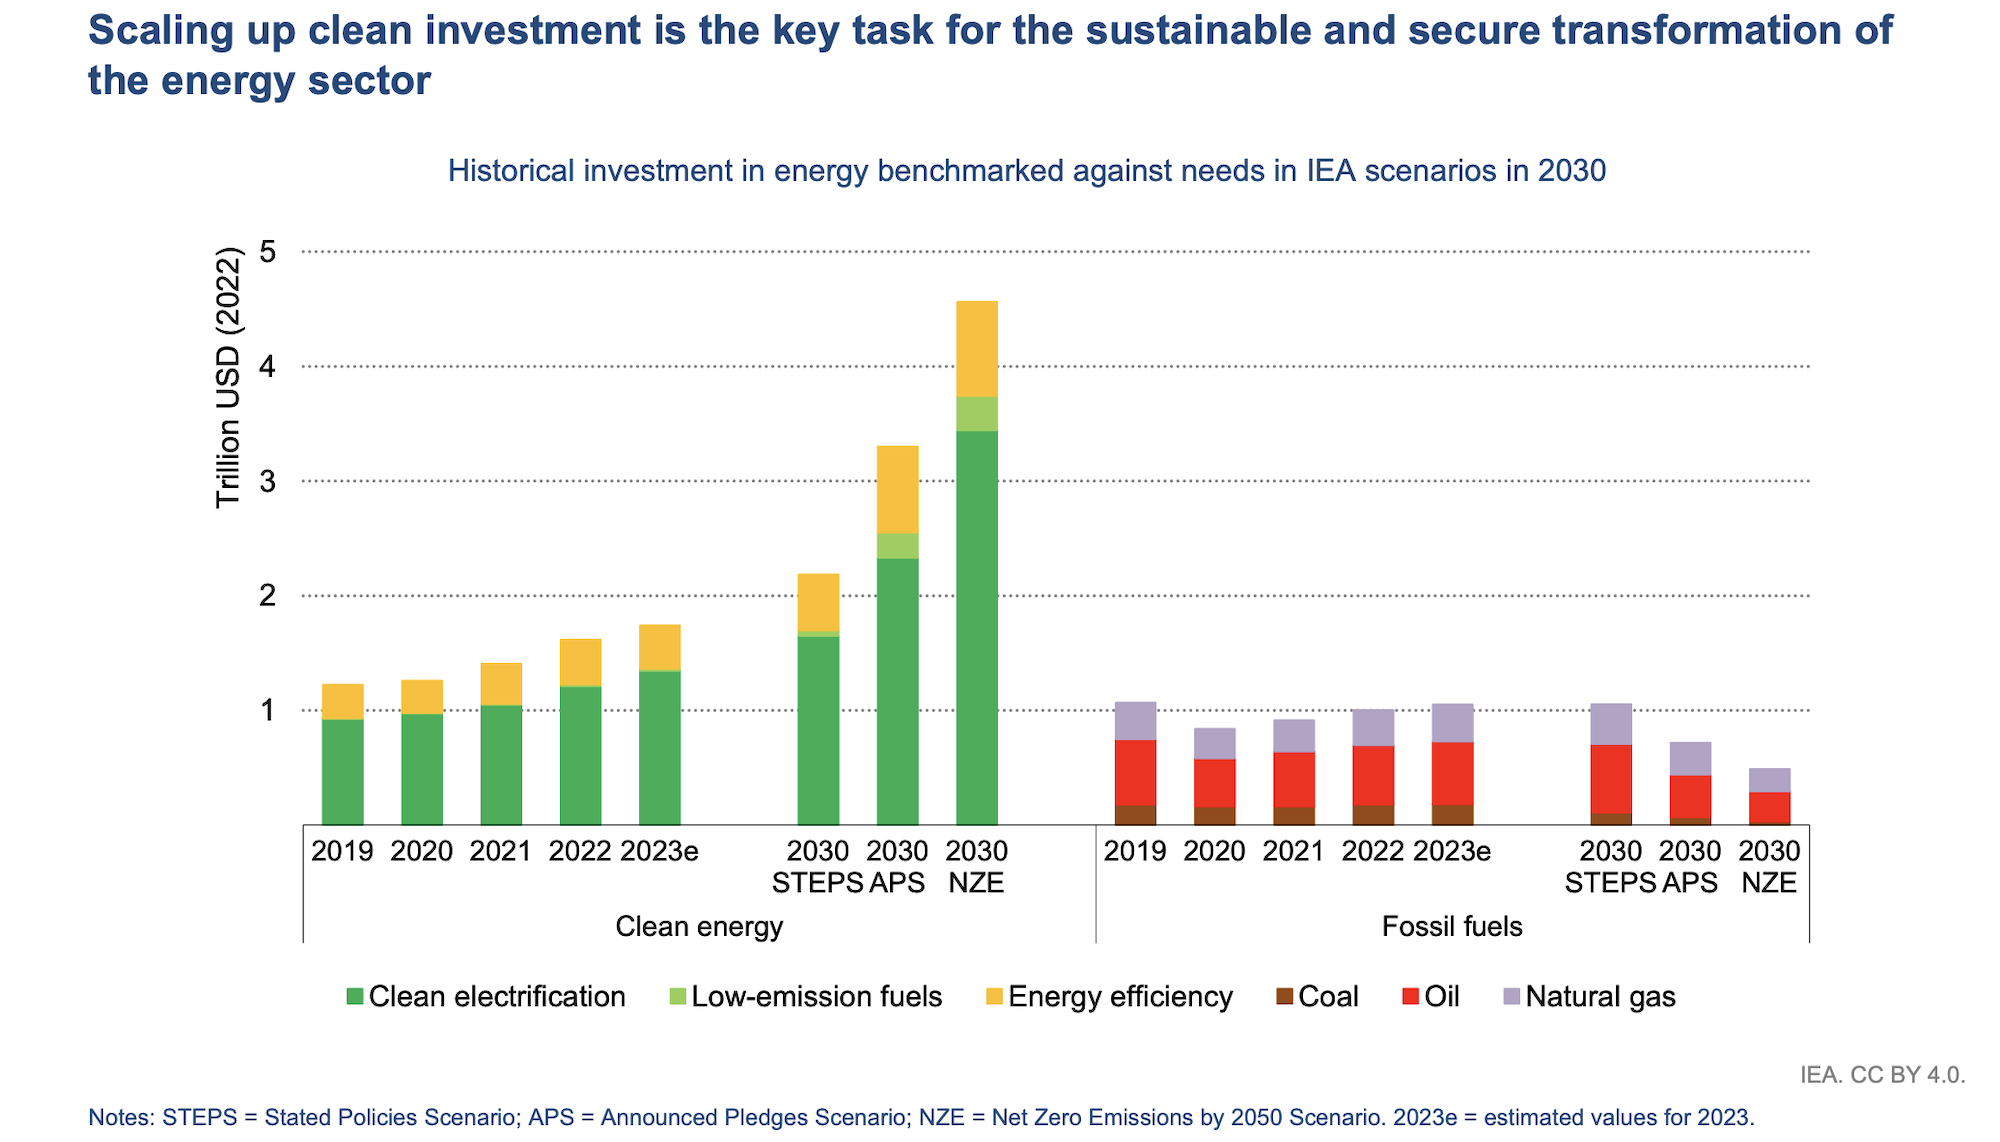 https://cleantechnica.com/wp-content/uploads/2023/06/clean-energy-vs-fossil-fuels-IEA-investment.png